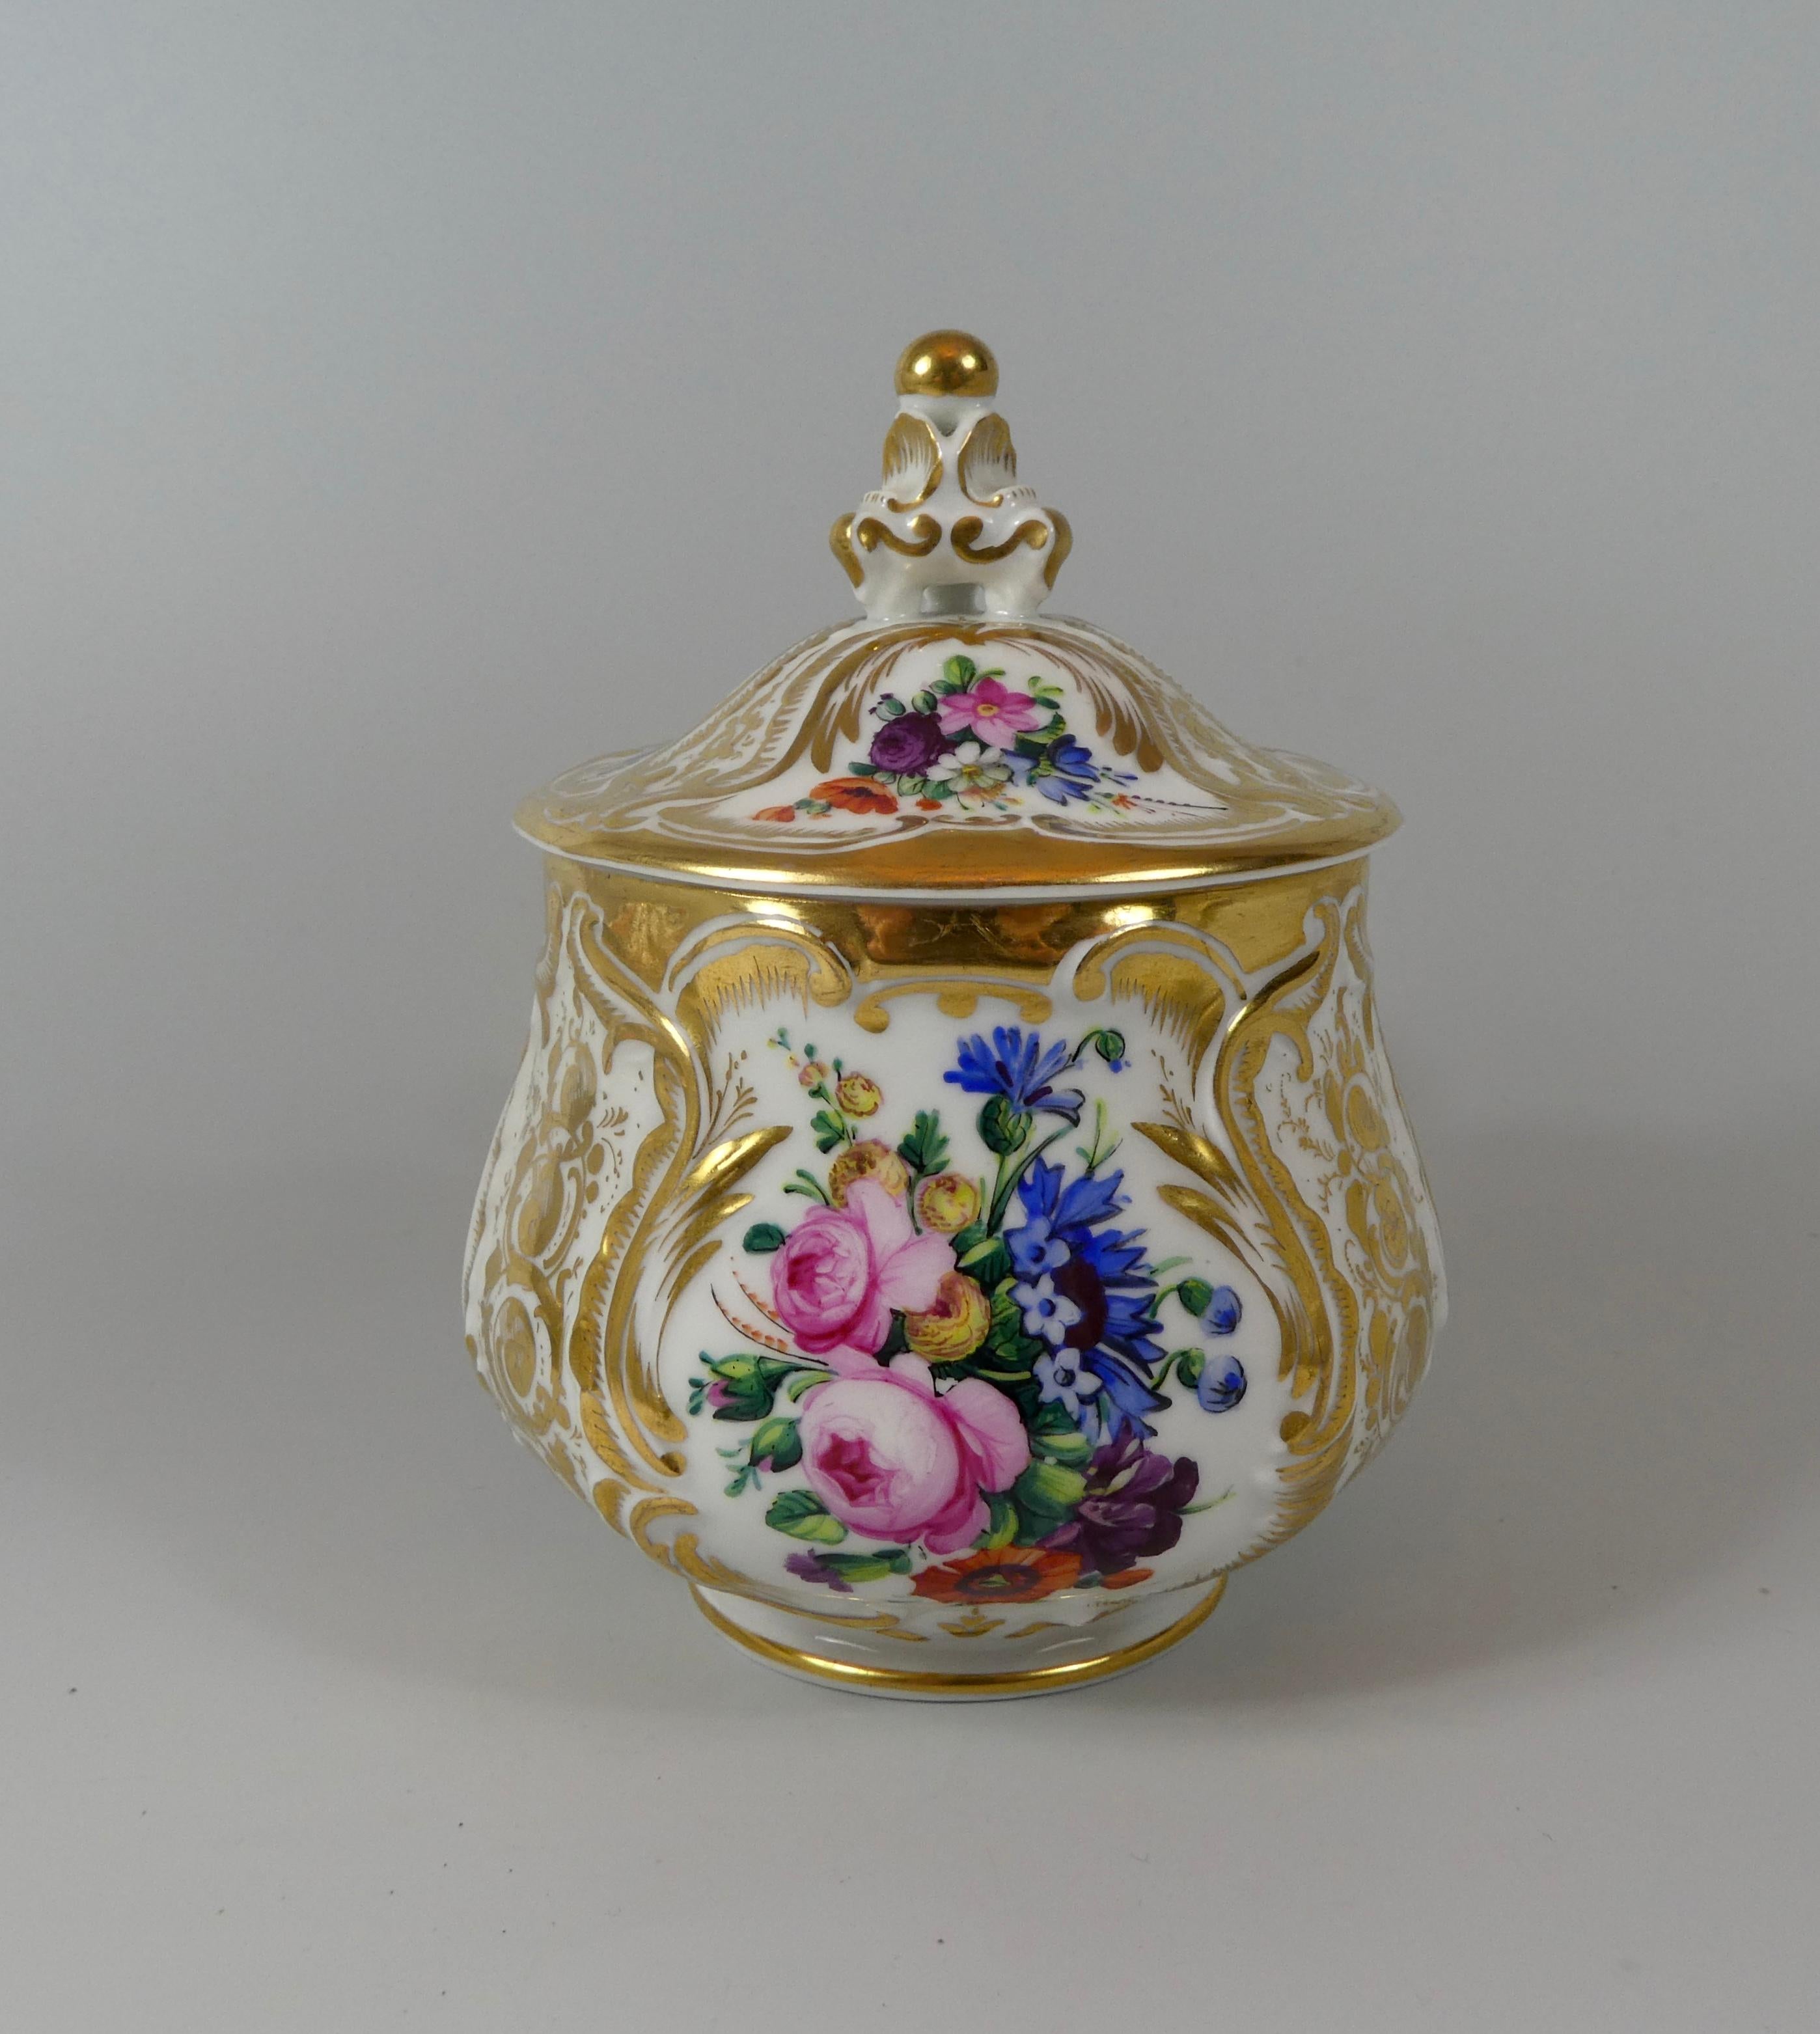 Mid-19th Century KPM Berlin Porcelain Chocolate Cup, Cover and Stand, circa 1860